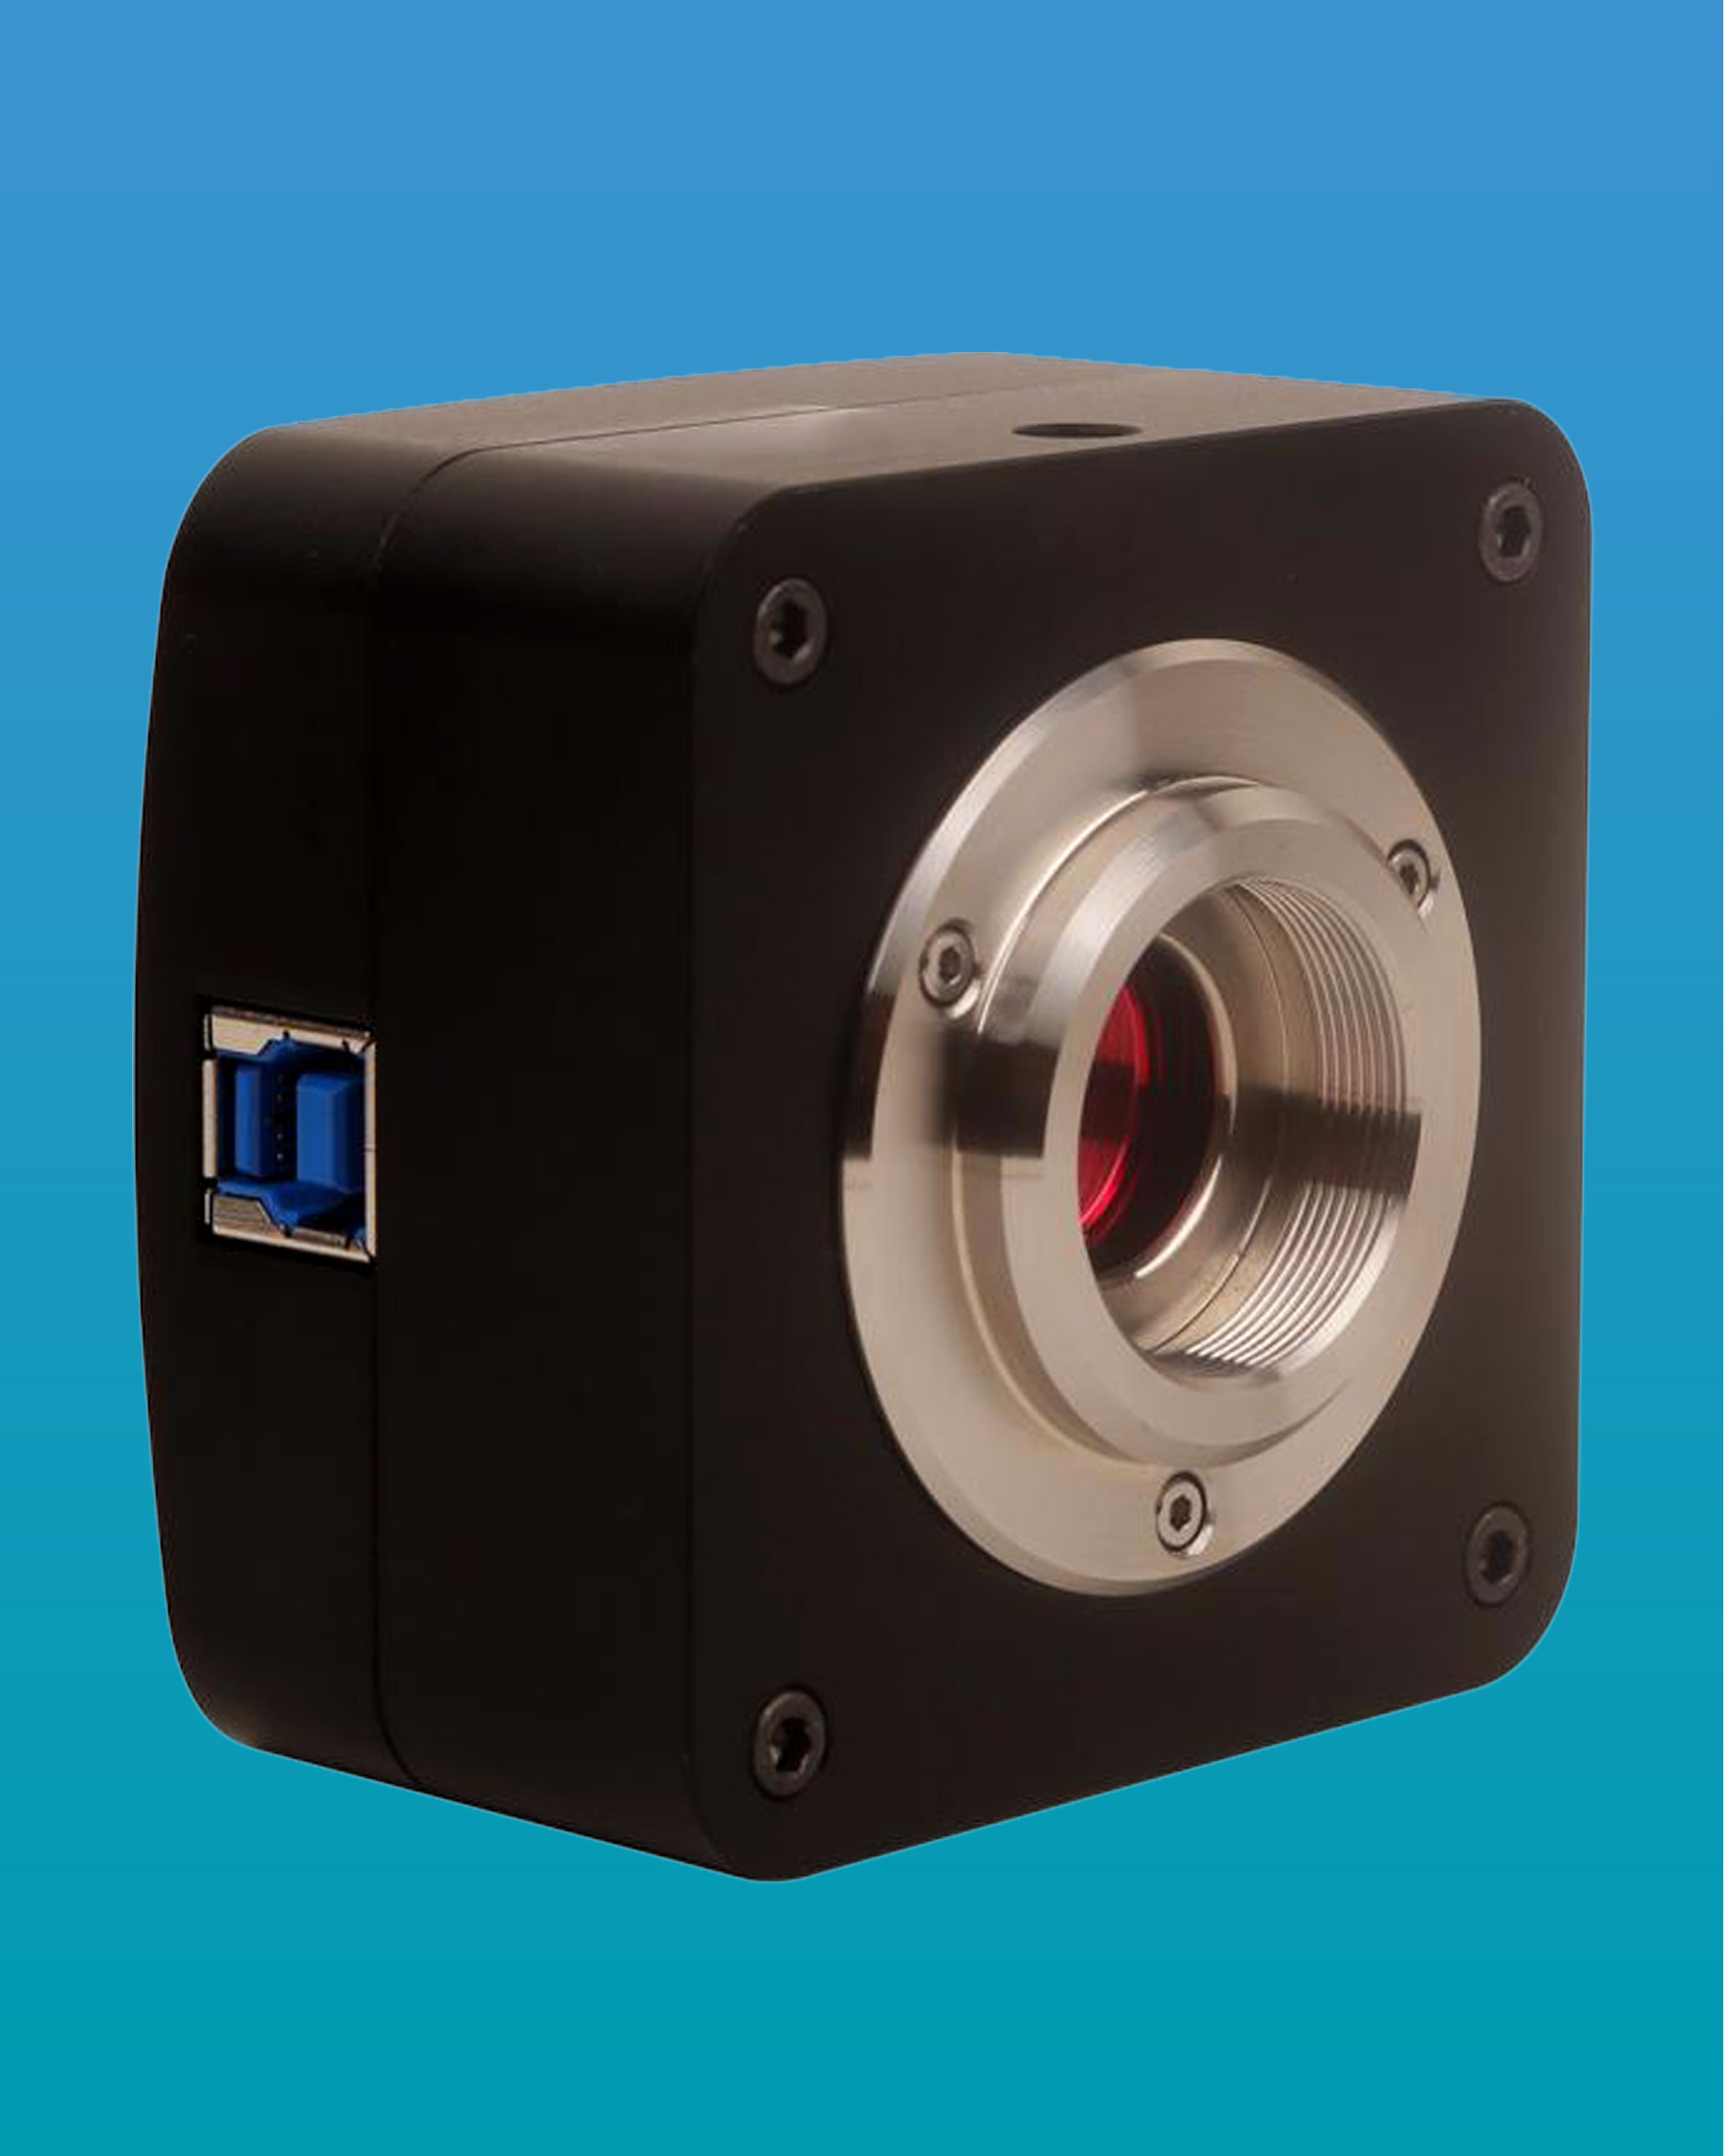 LC-32 C-mount USB3.0 CMOS Camera for Bright Field, Dark Field, Fluorescent Light Environment and Normal Microscope